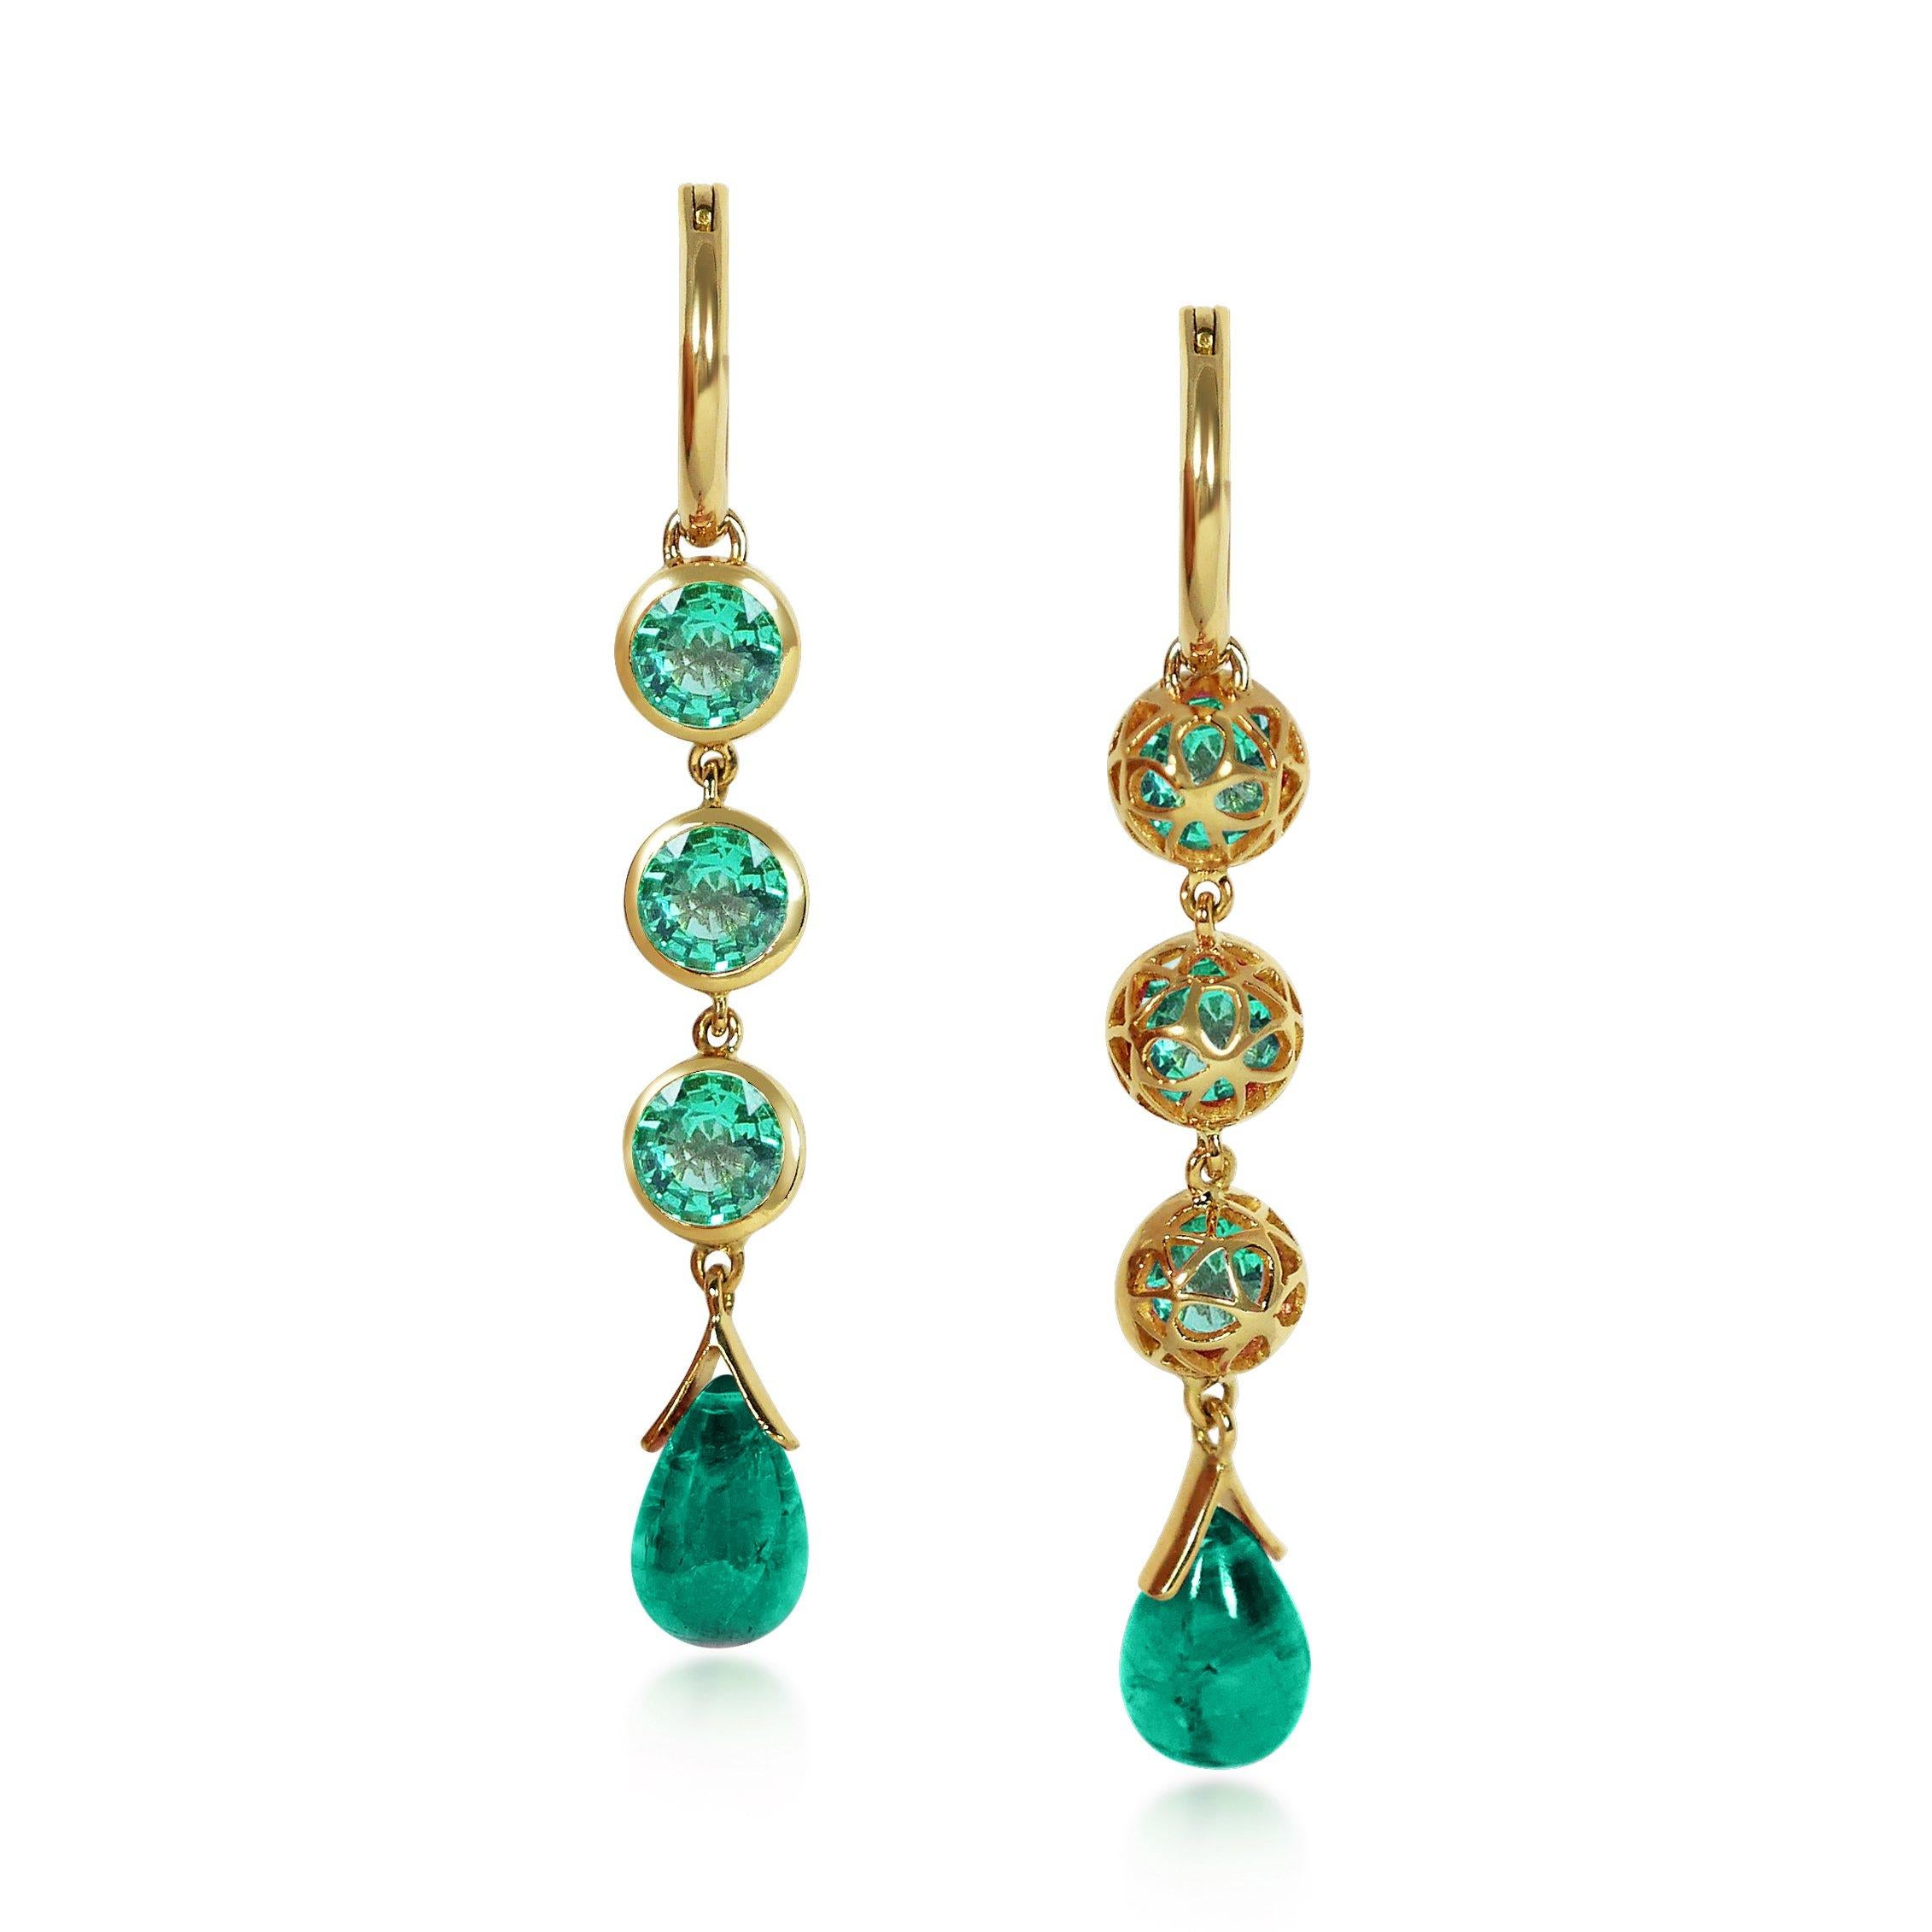 Handcrafted 1.35 Carats Emerald 18 Karat Yellow Gold Drop Earrings. Our stone cascade-like earrings are an elegant statement underlined by romantic dancing drops carved in Emerald under a set of 6mm round cut Emerald stones encased in our iconic